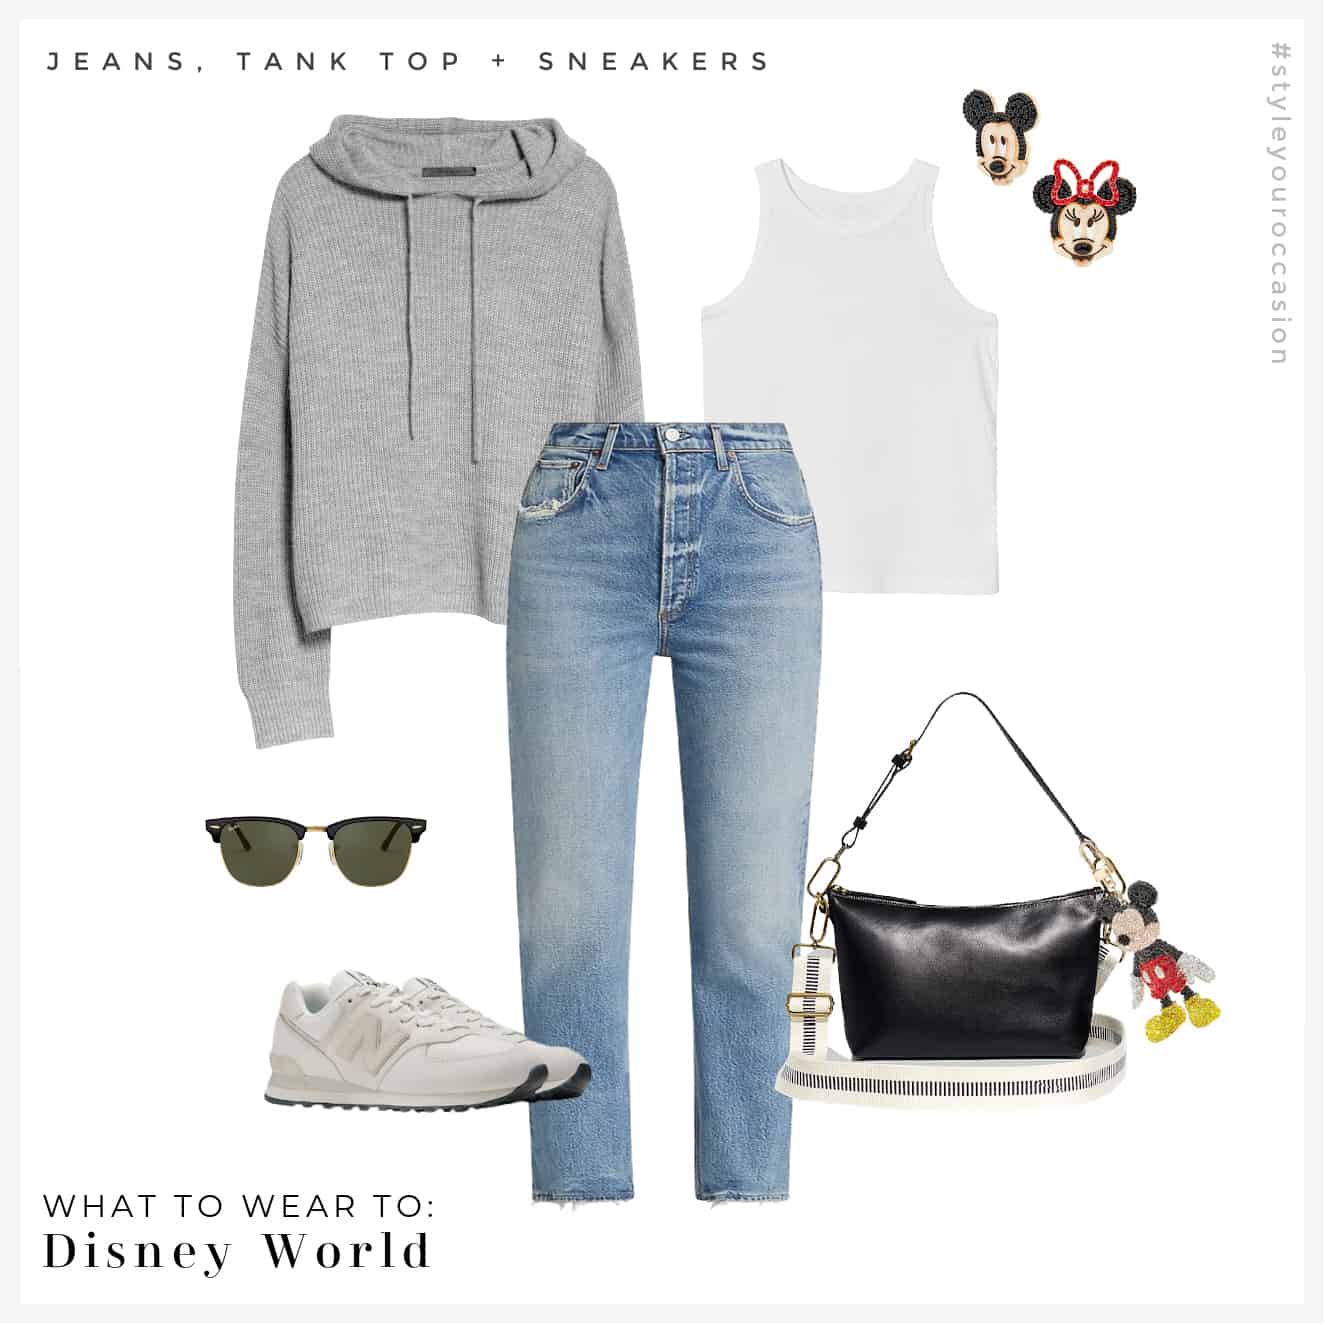 image of an outfit for Disney World with blue jeans, a white tank, sneakers, and a knit hoodie with Minnie mouse earrings 